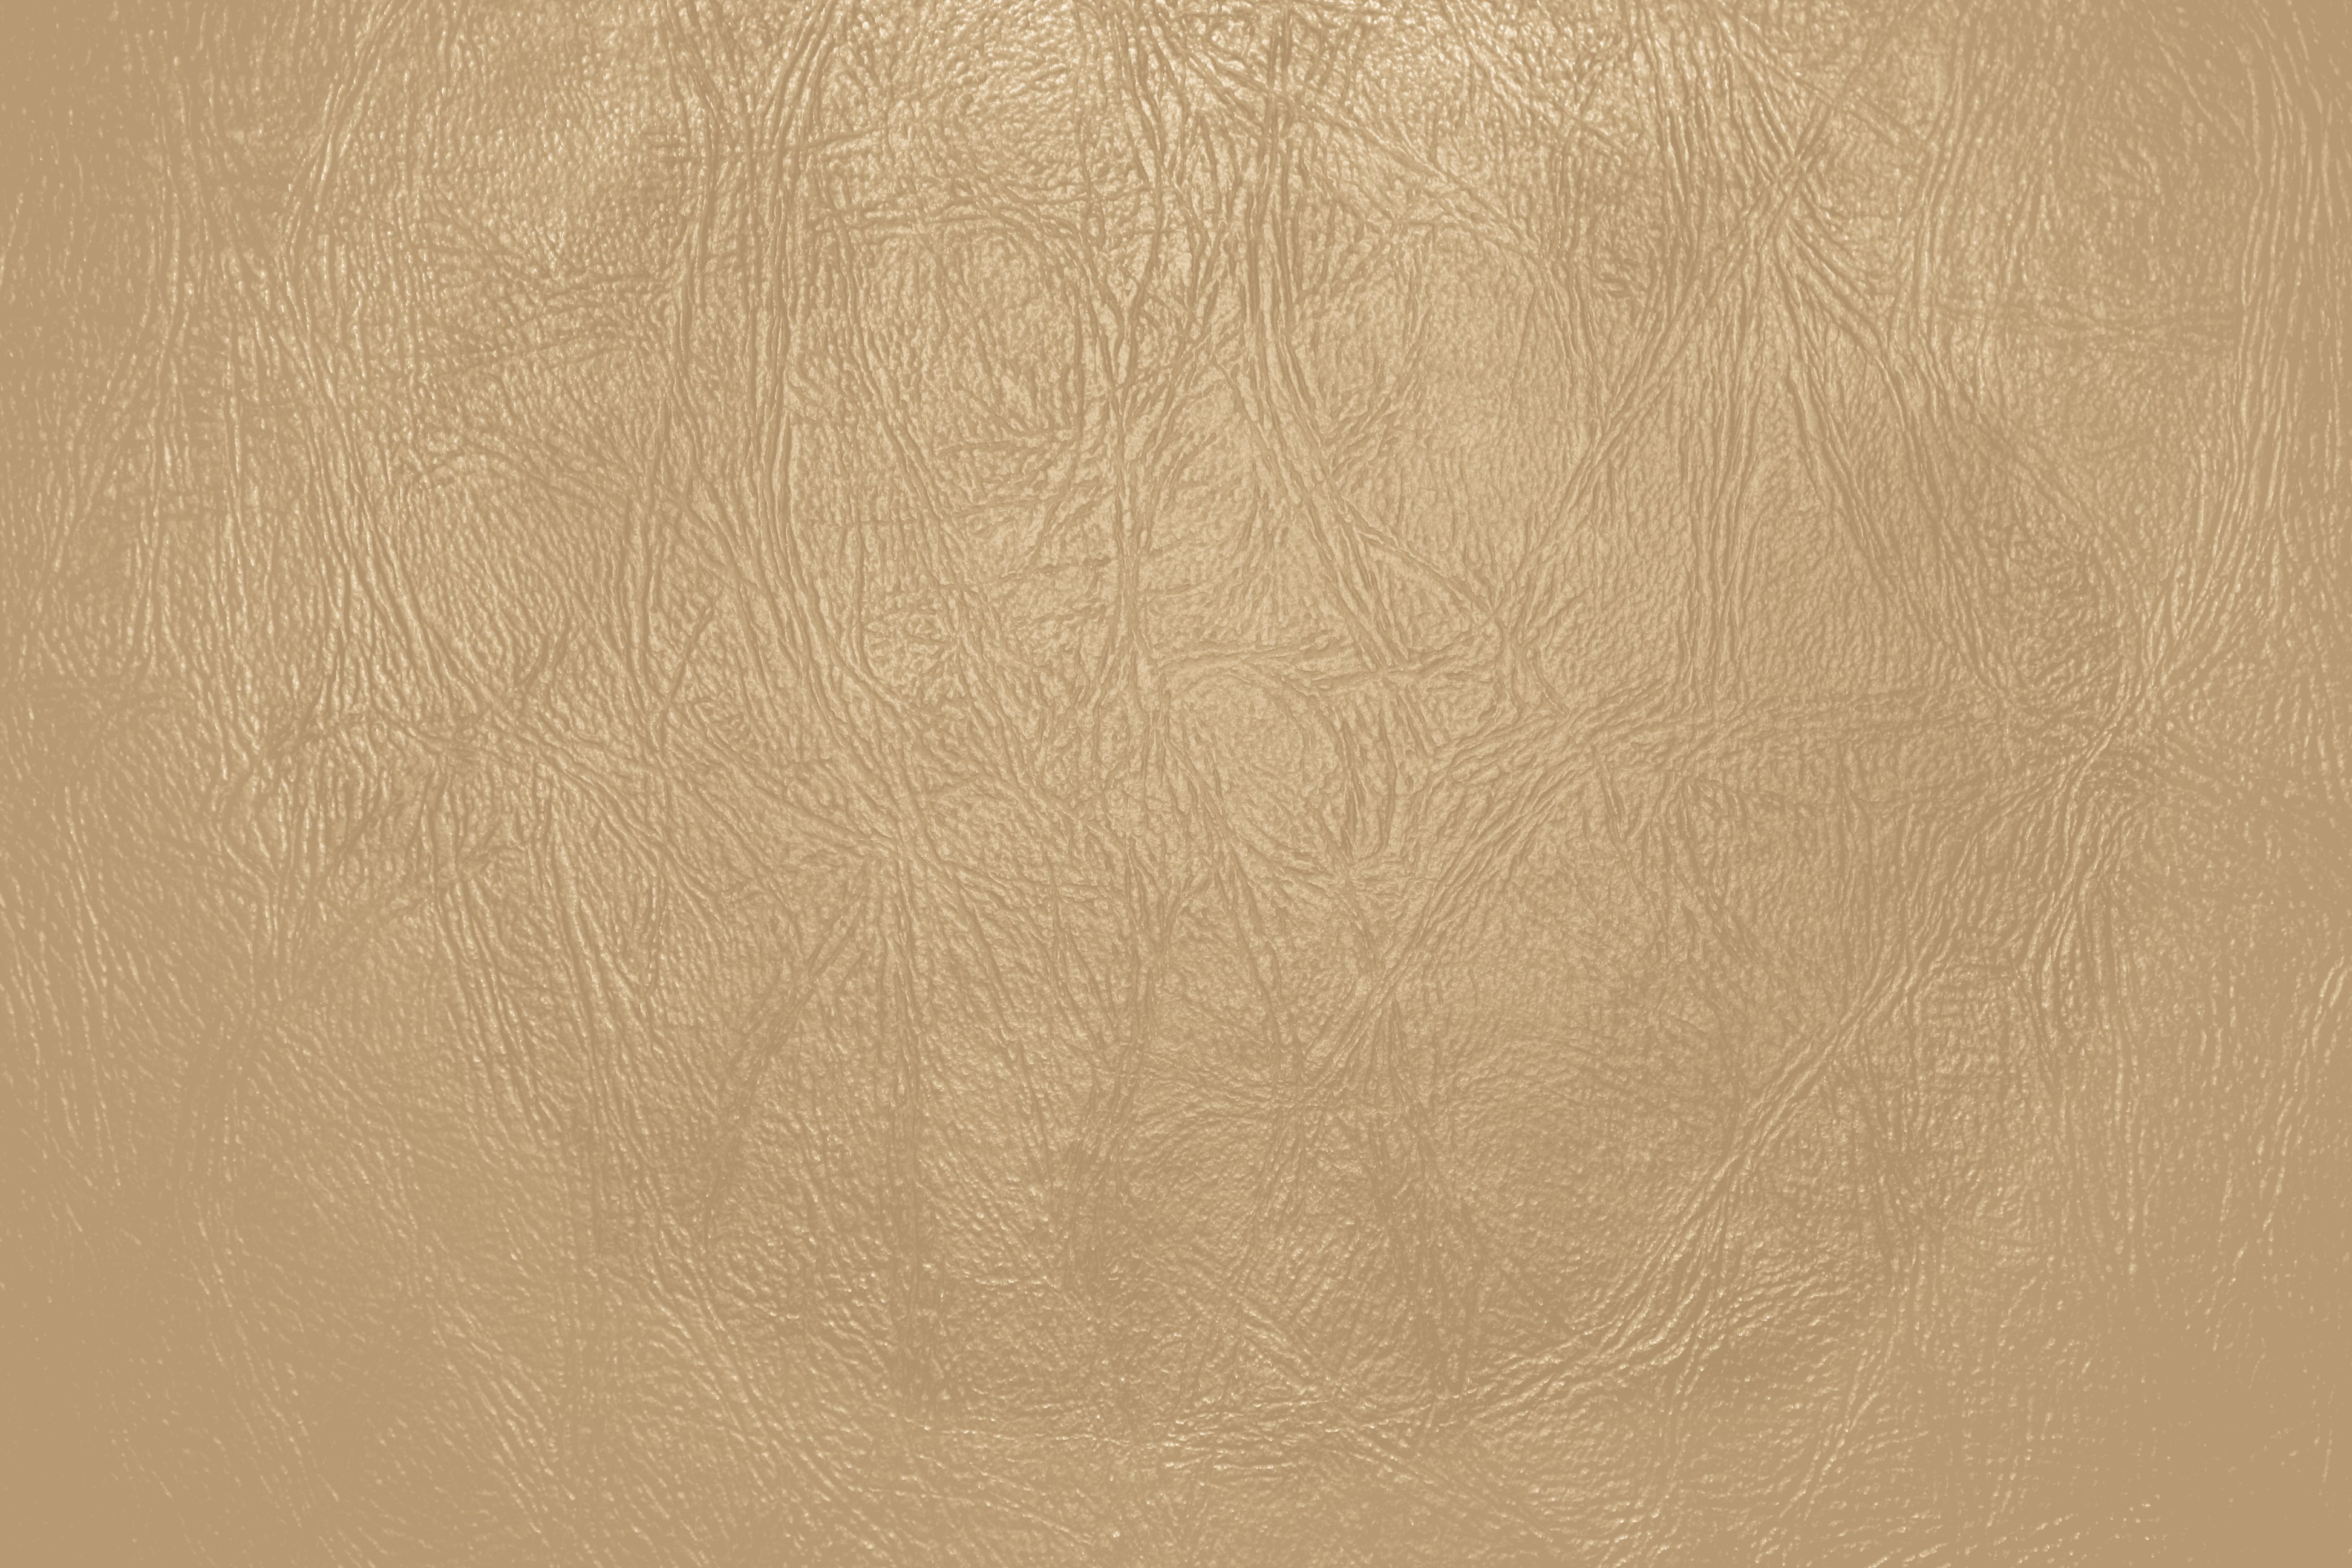 Tan Leather Close Up Texture Picture | Free Photograph | Photos ...